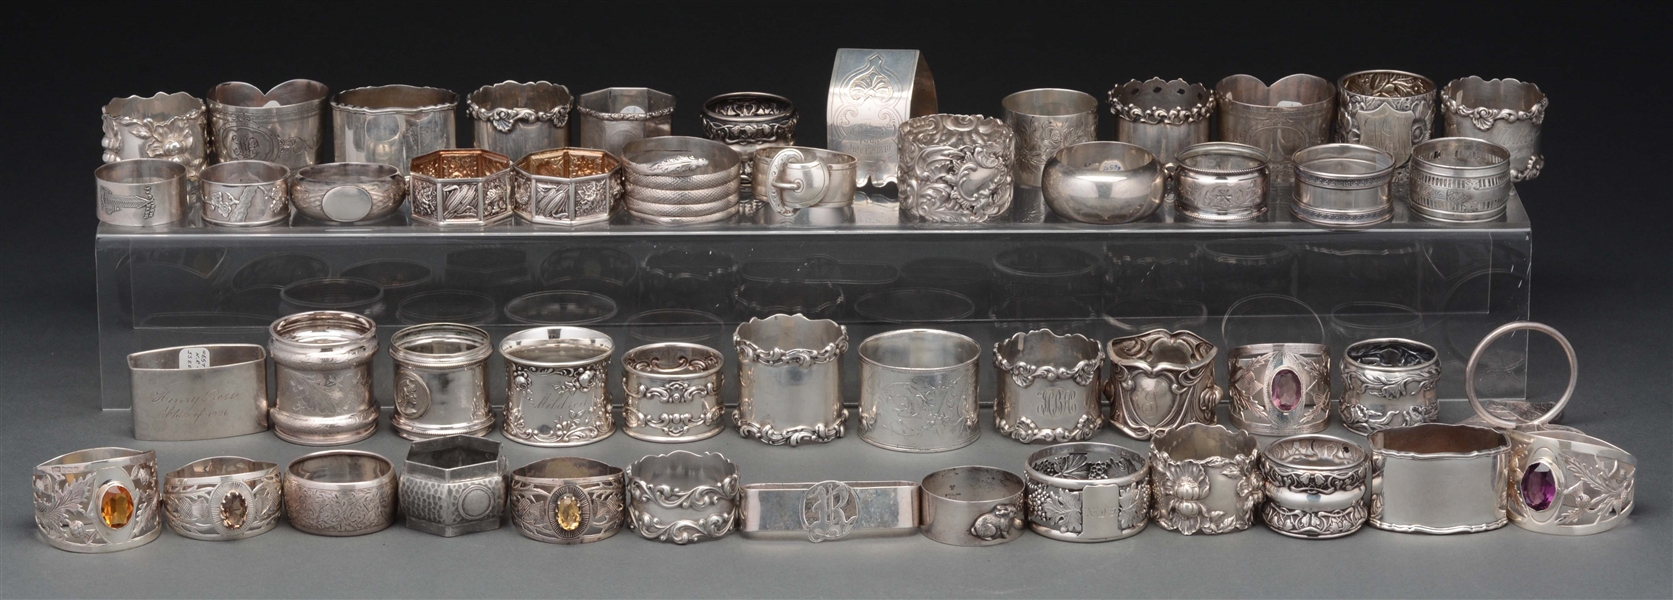 LOT OF OVER 50 STERLING SILVER NAPKIN RINGS. 